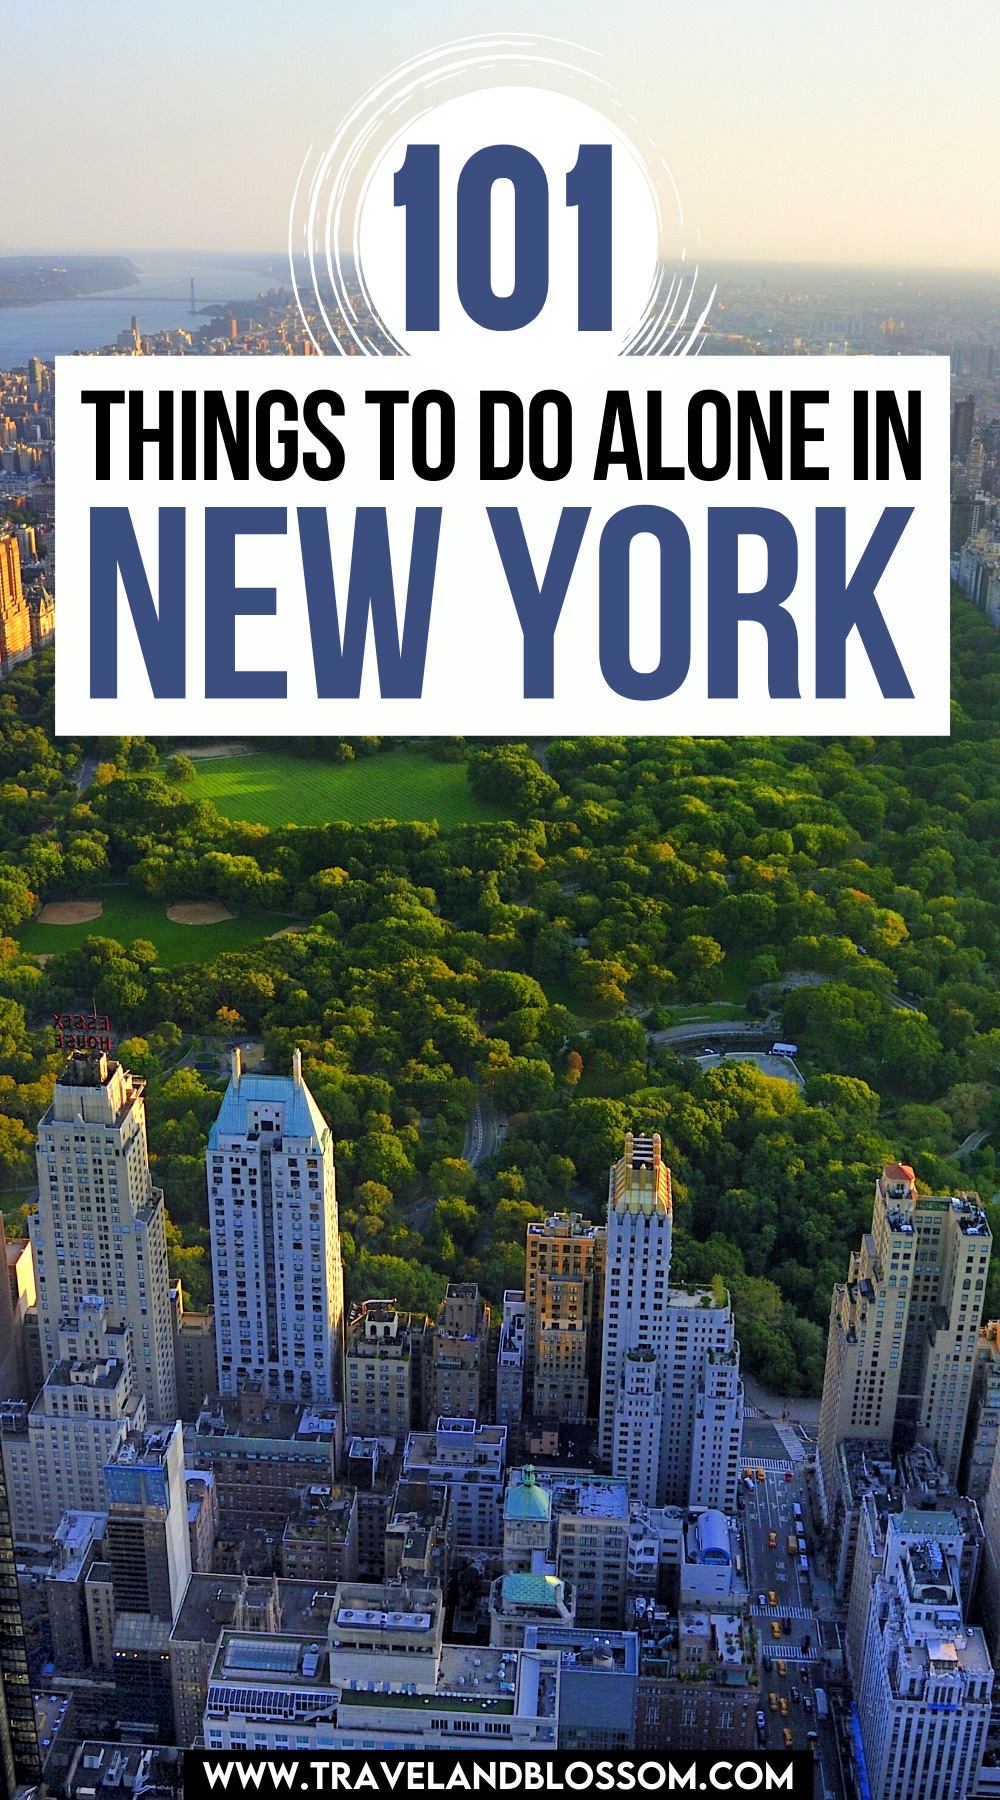 101 Things to Do Alone in NYC